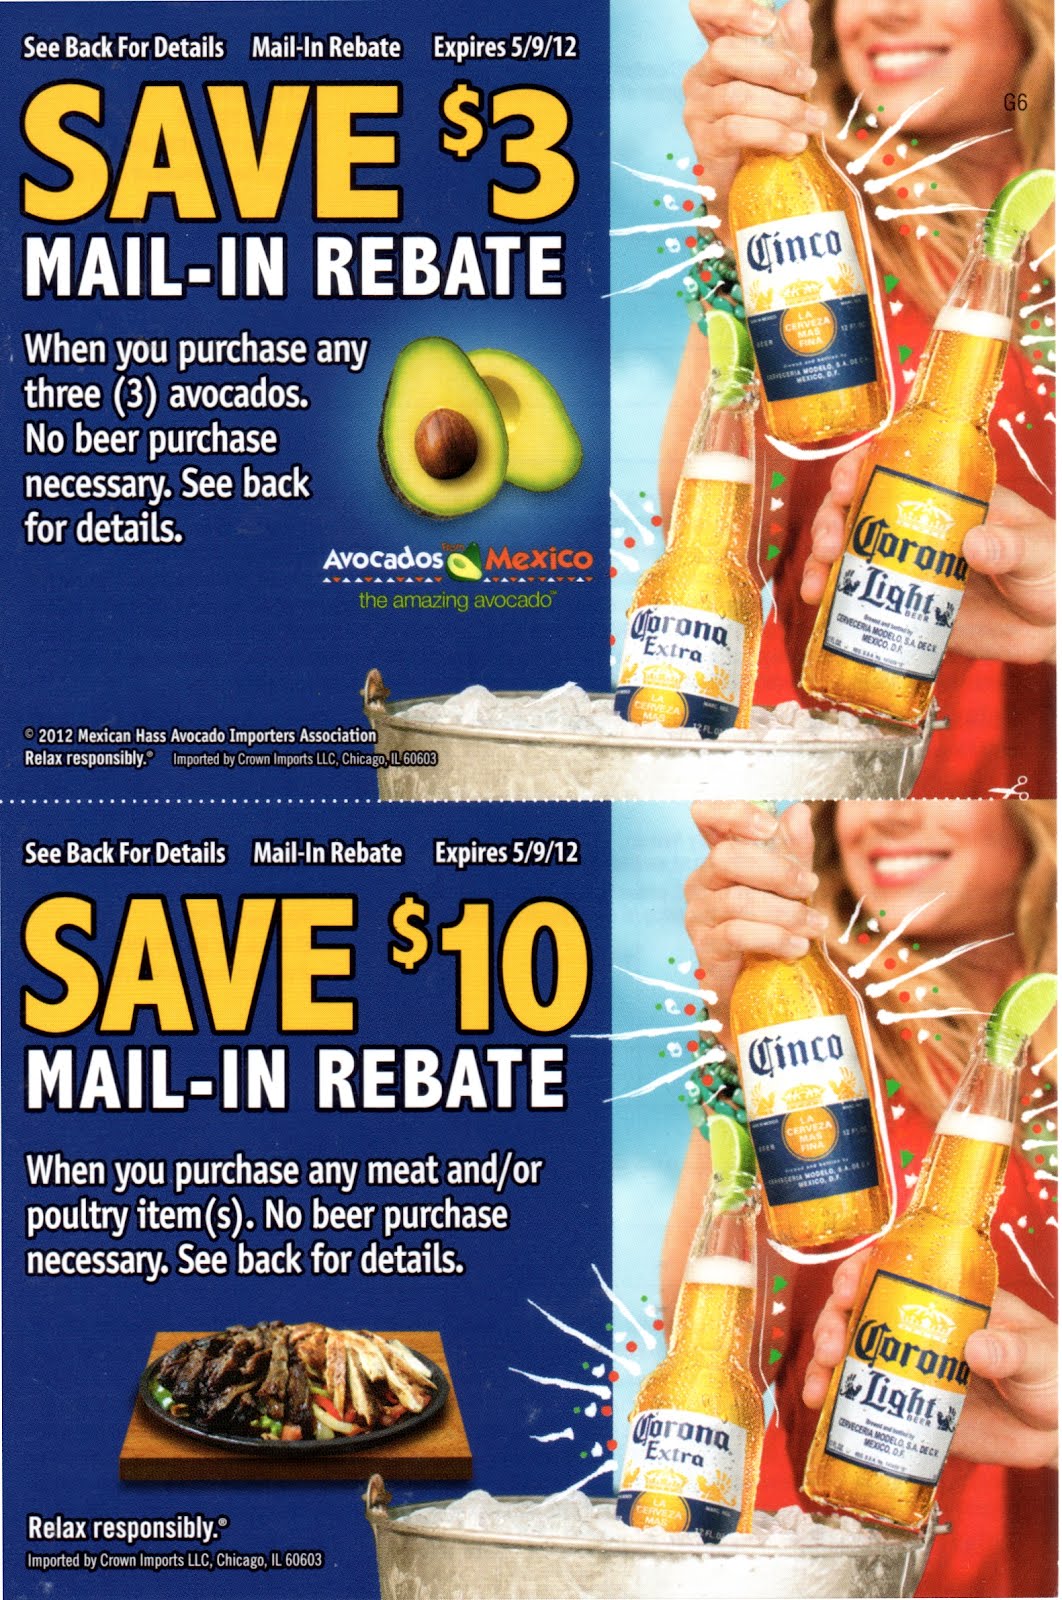 coupon-stl-corona-beer-rebates-3-on-avocados-and-10-on-meat-or-poultry